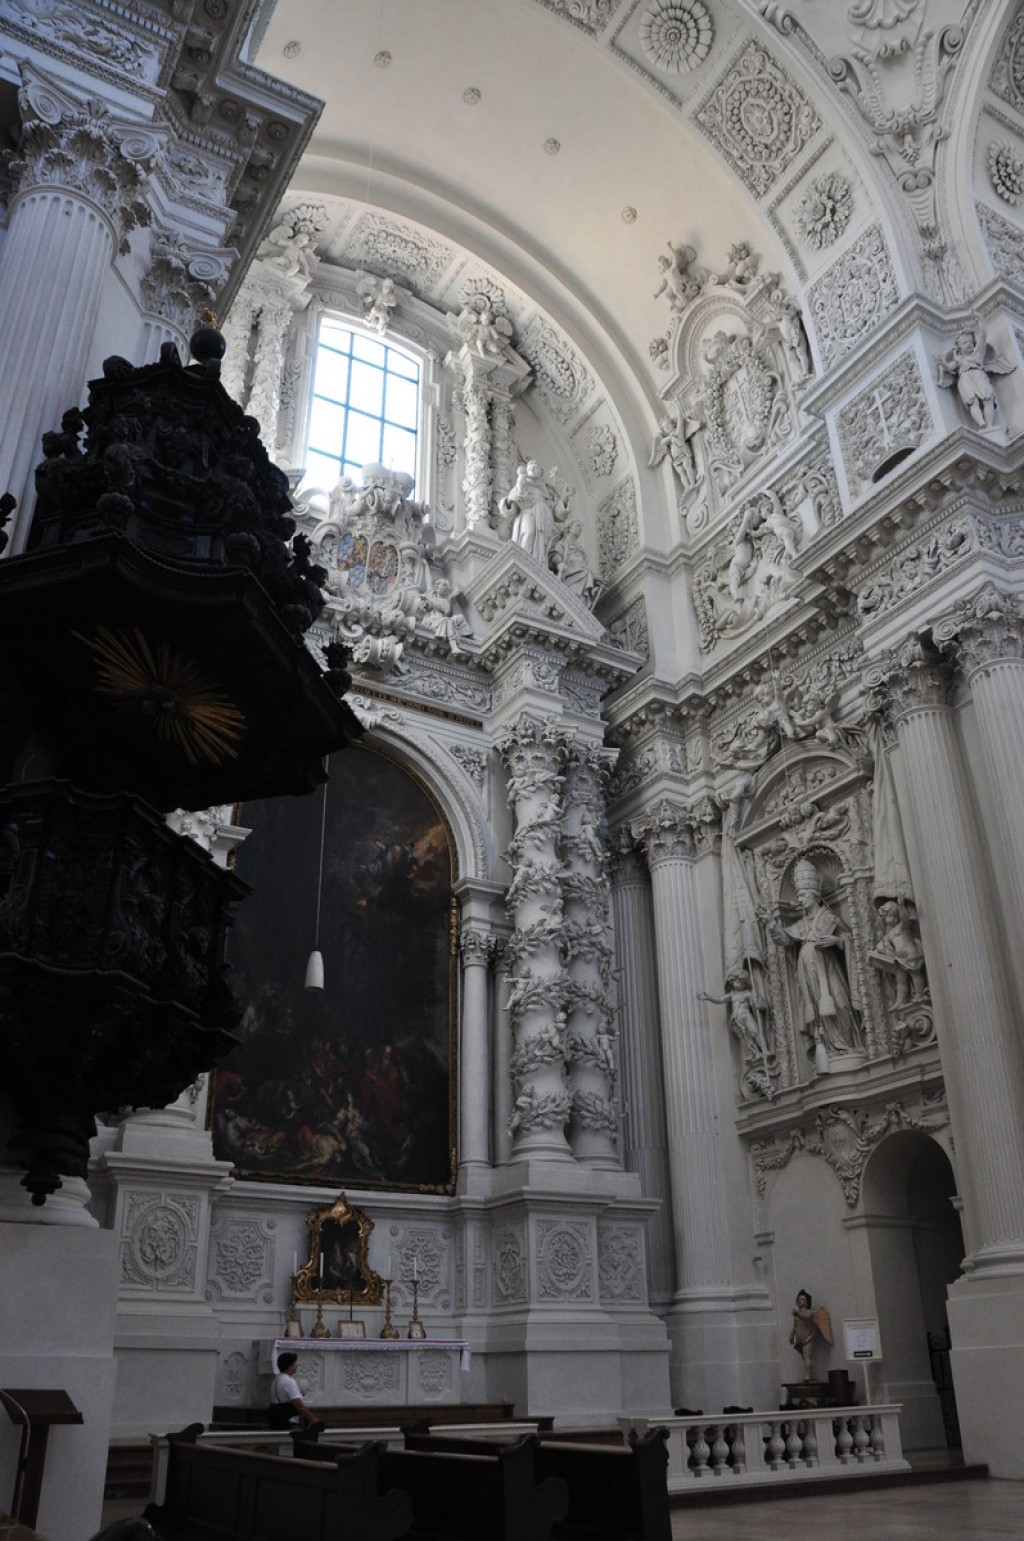 The churches of Munich were some of the most beautiful we've seen.